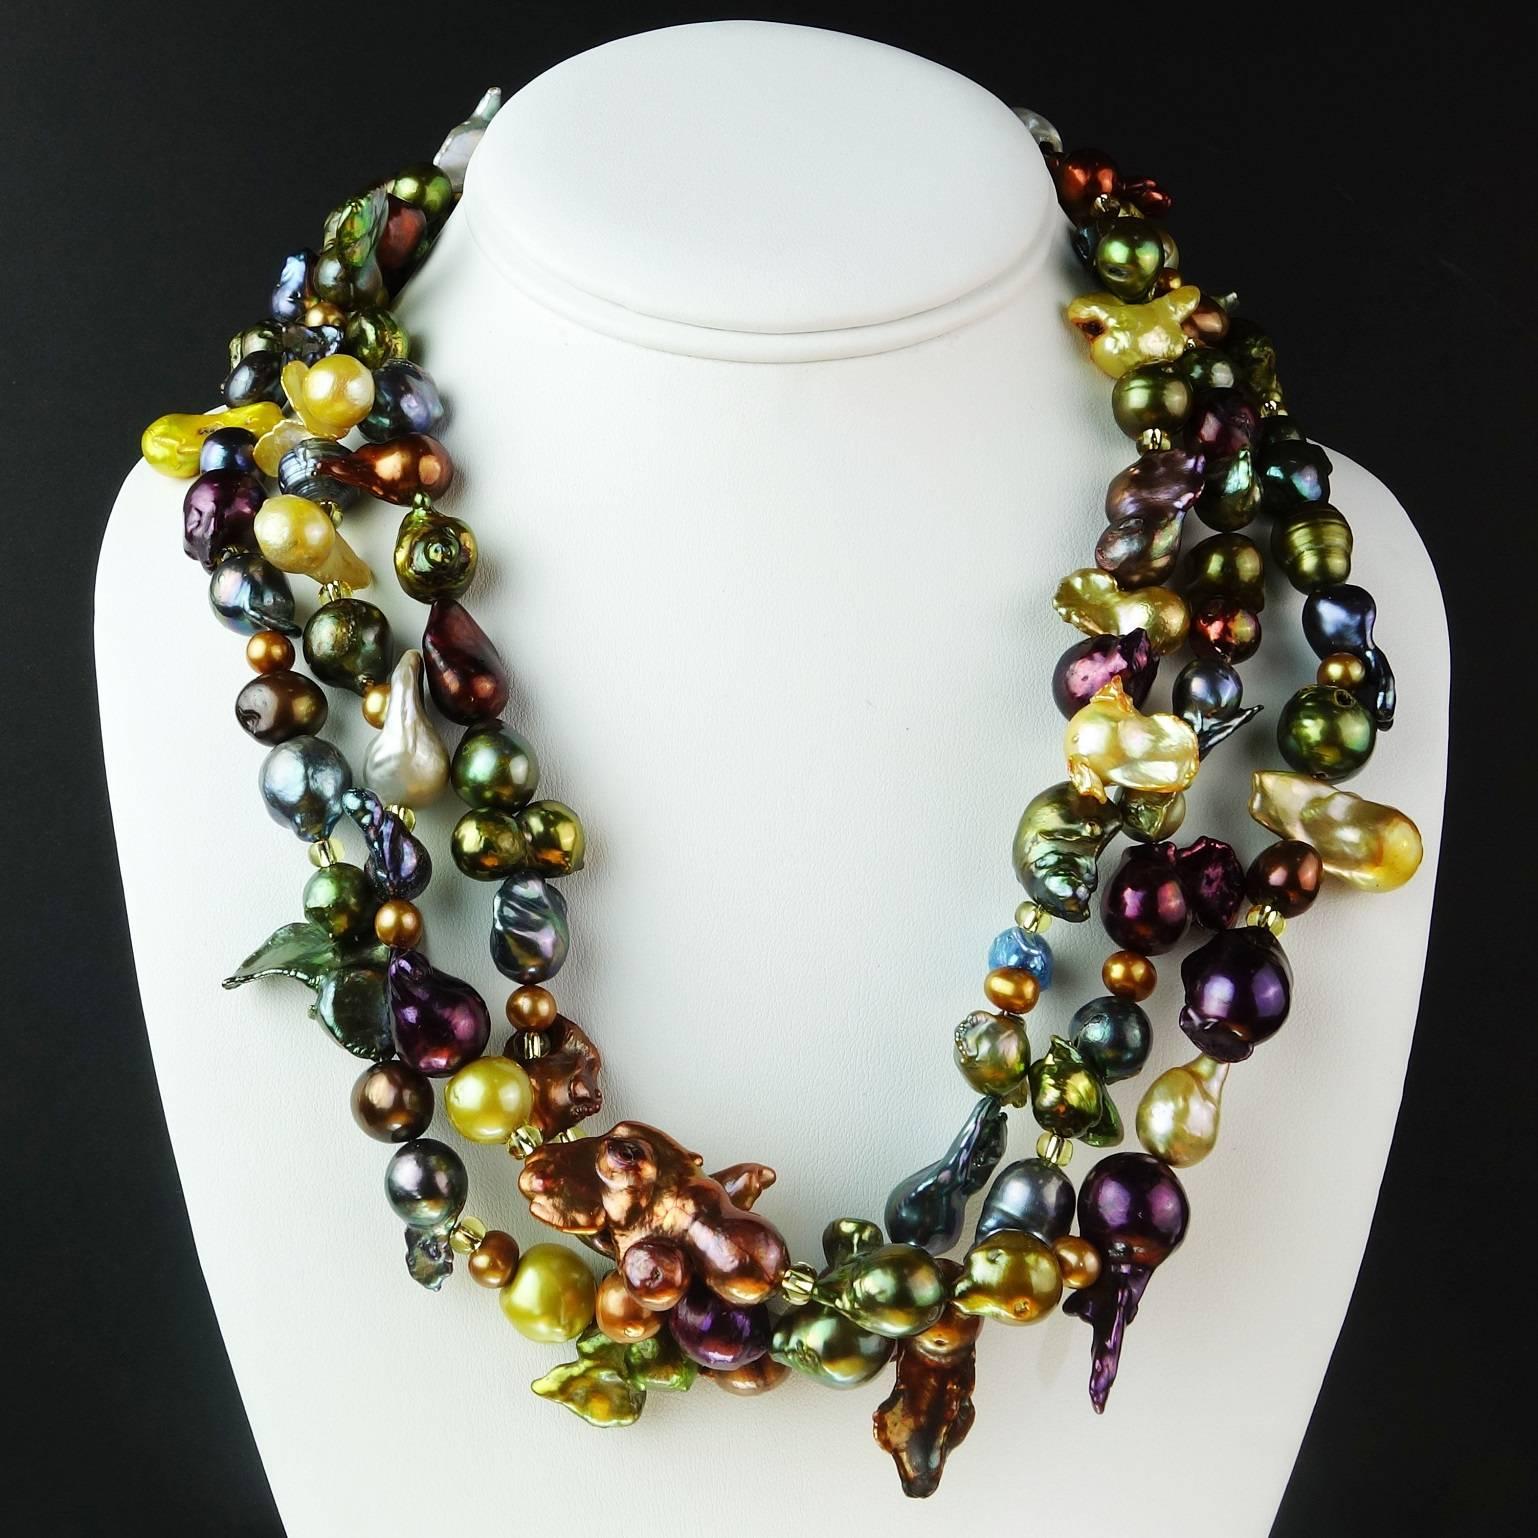 Multi shape, multi color, multi size Pearls in a custom made three strand necklace that will knock your socks off! This jewel tone necklace is so much fun you will want to wear it every day. Every pearl is a delight.  There are gold Czech beads